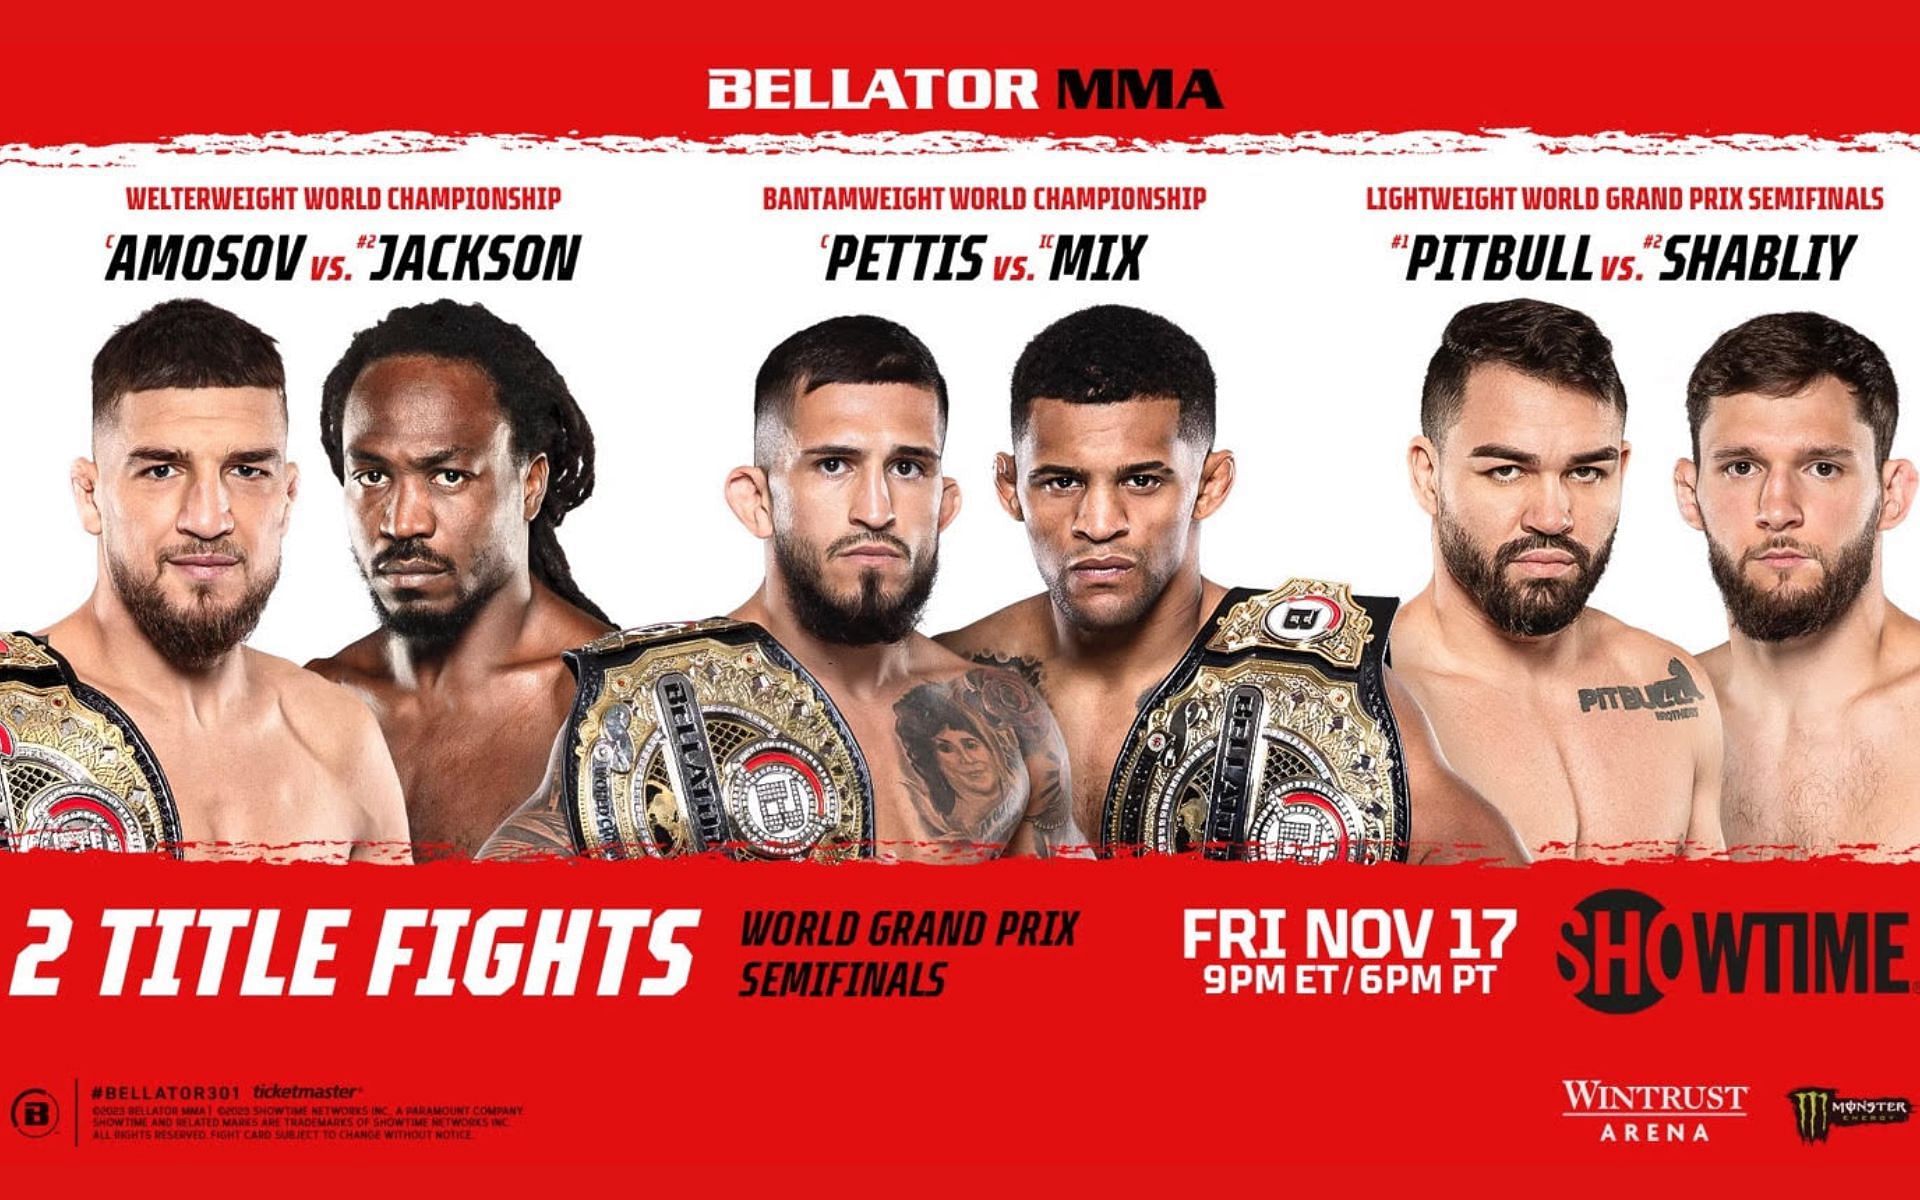 Official event poster [Photo credit: Bellator MMA]